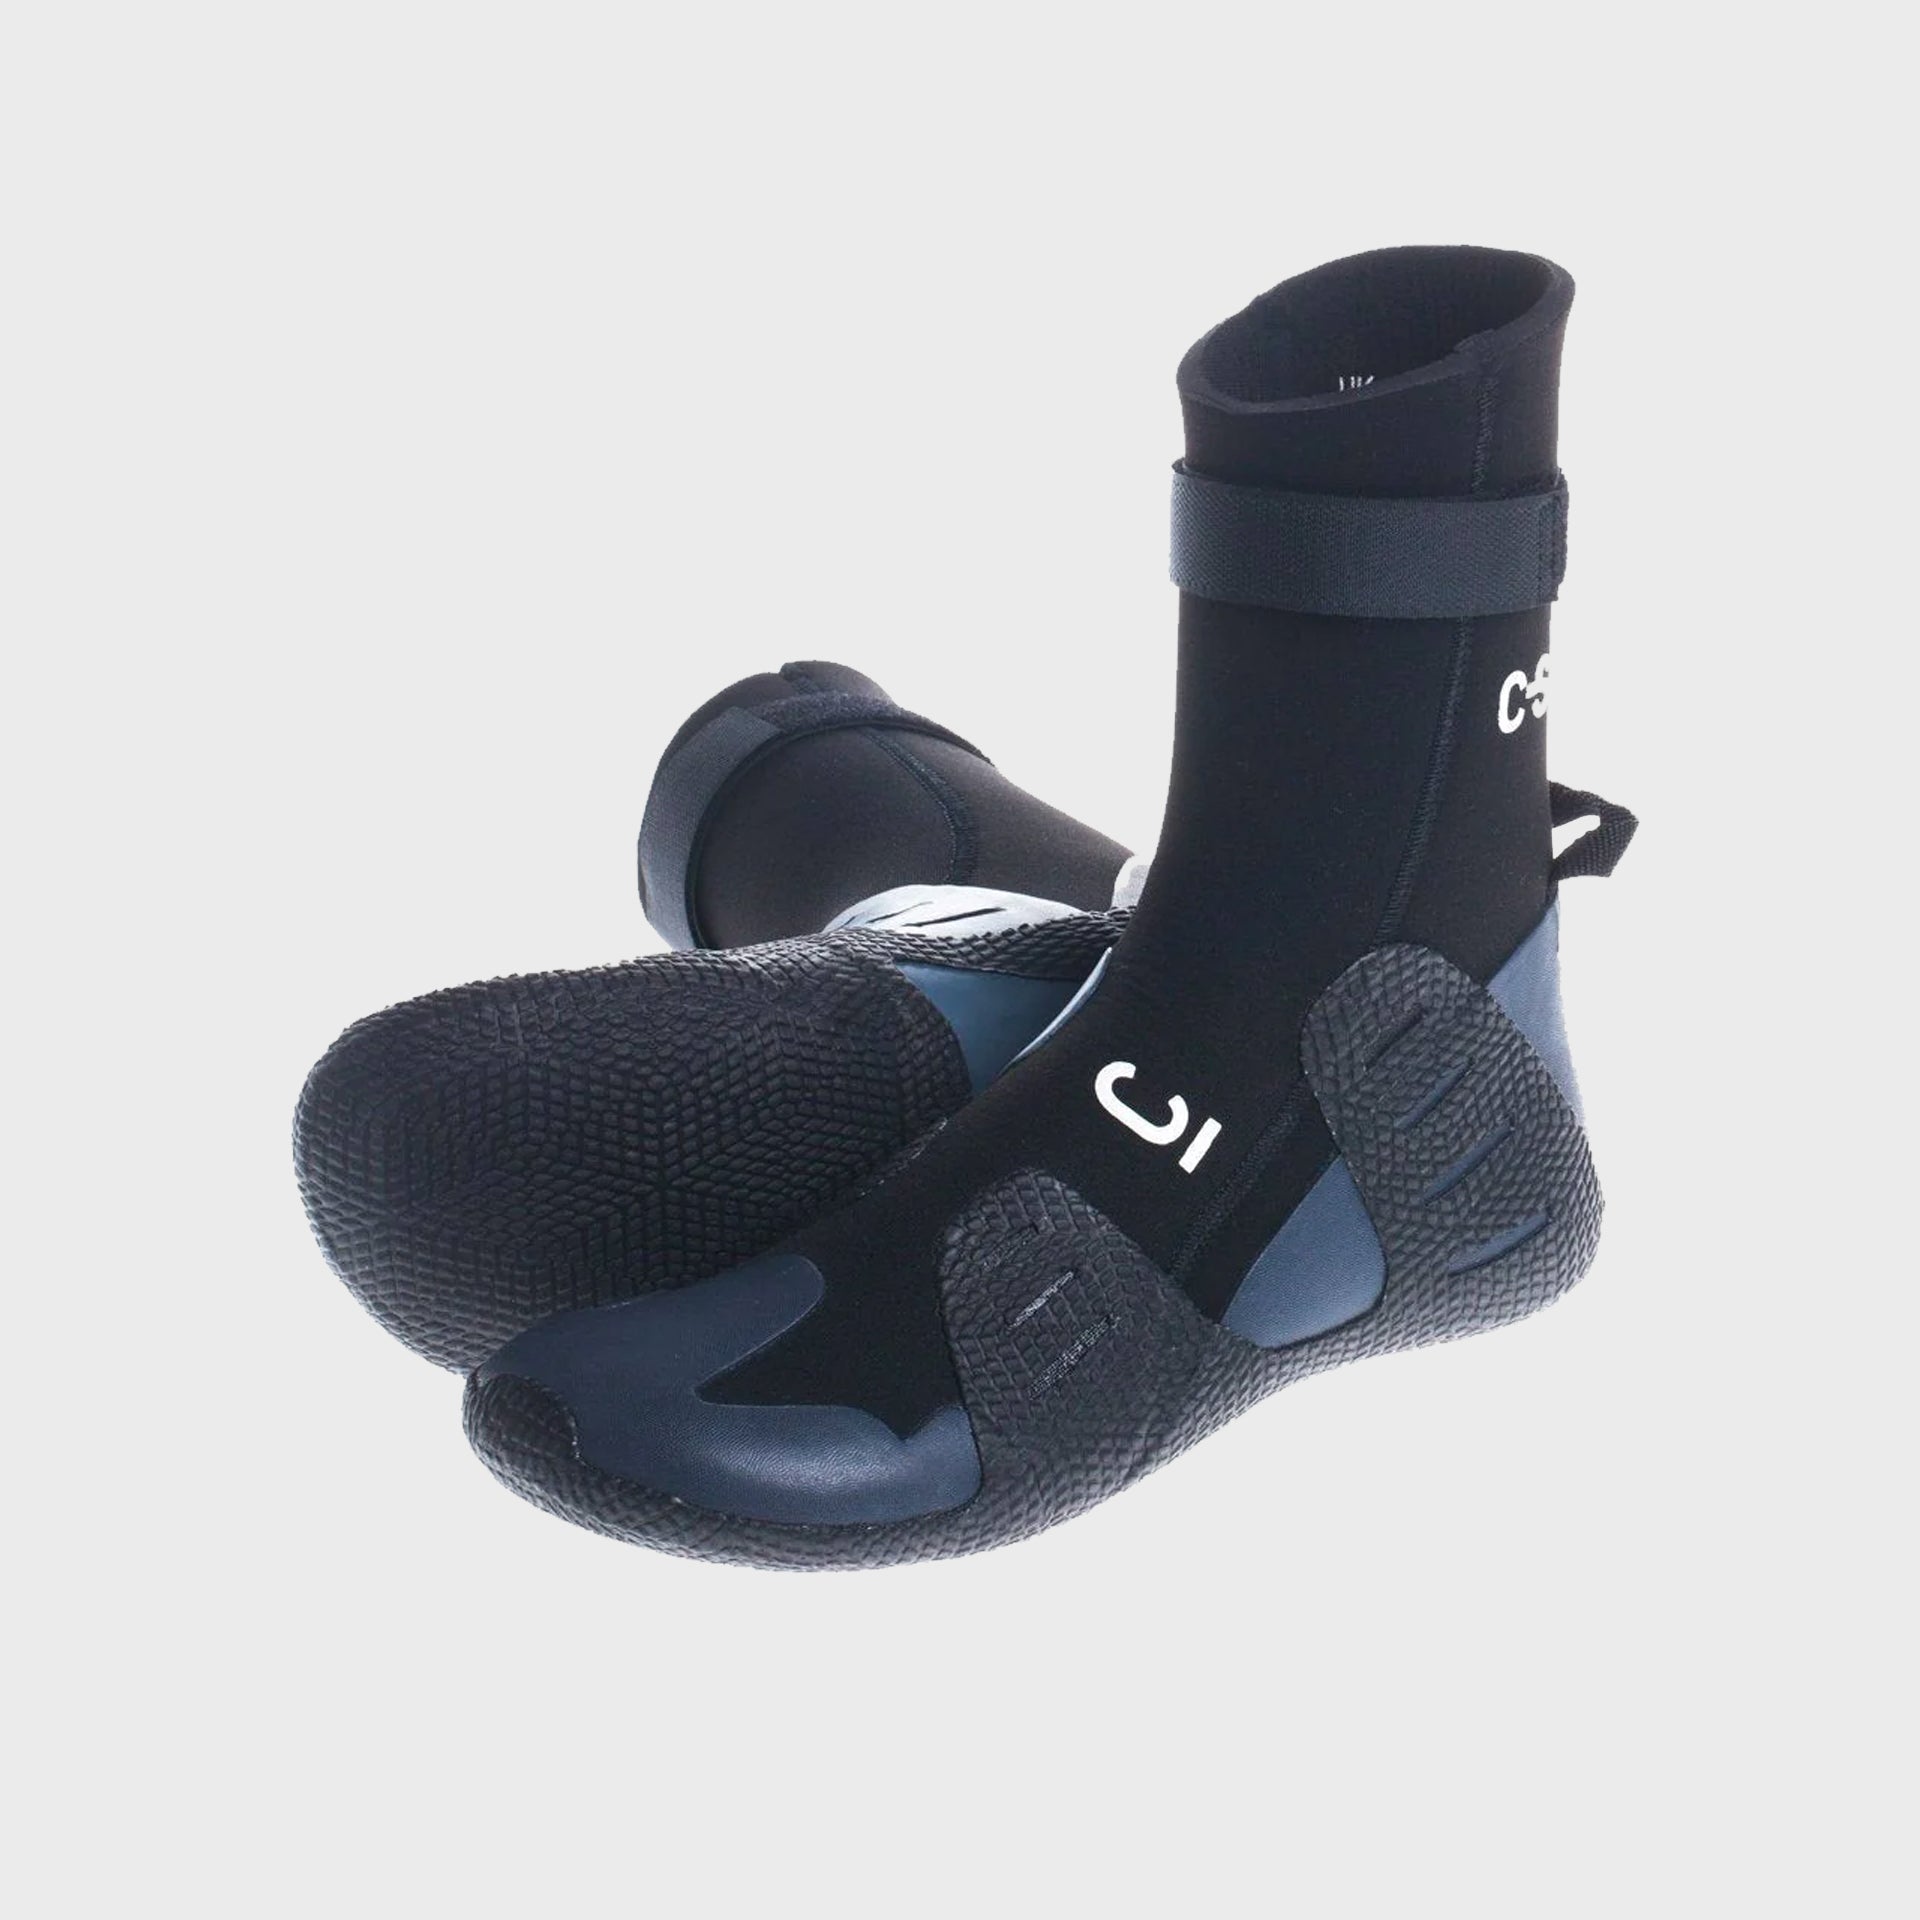 C-Skins Session 5mm Round Toe Wetsuit Boot - Black/Charcoal - ManGo Surfing